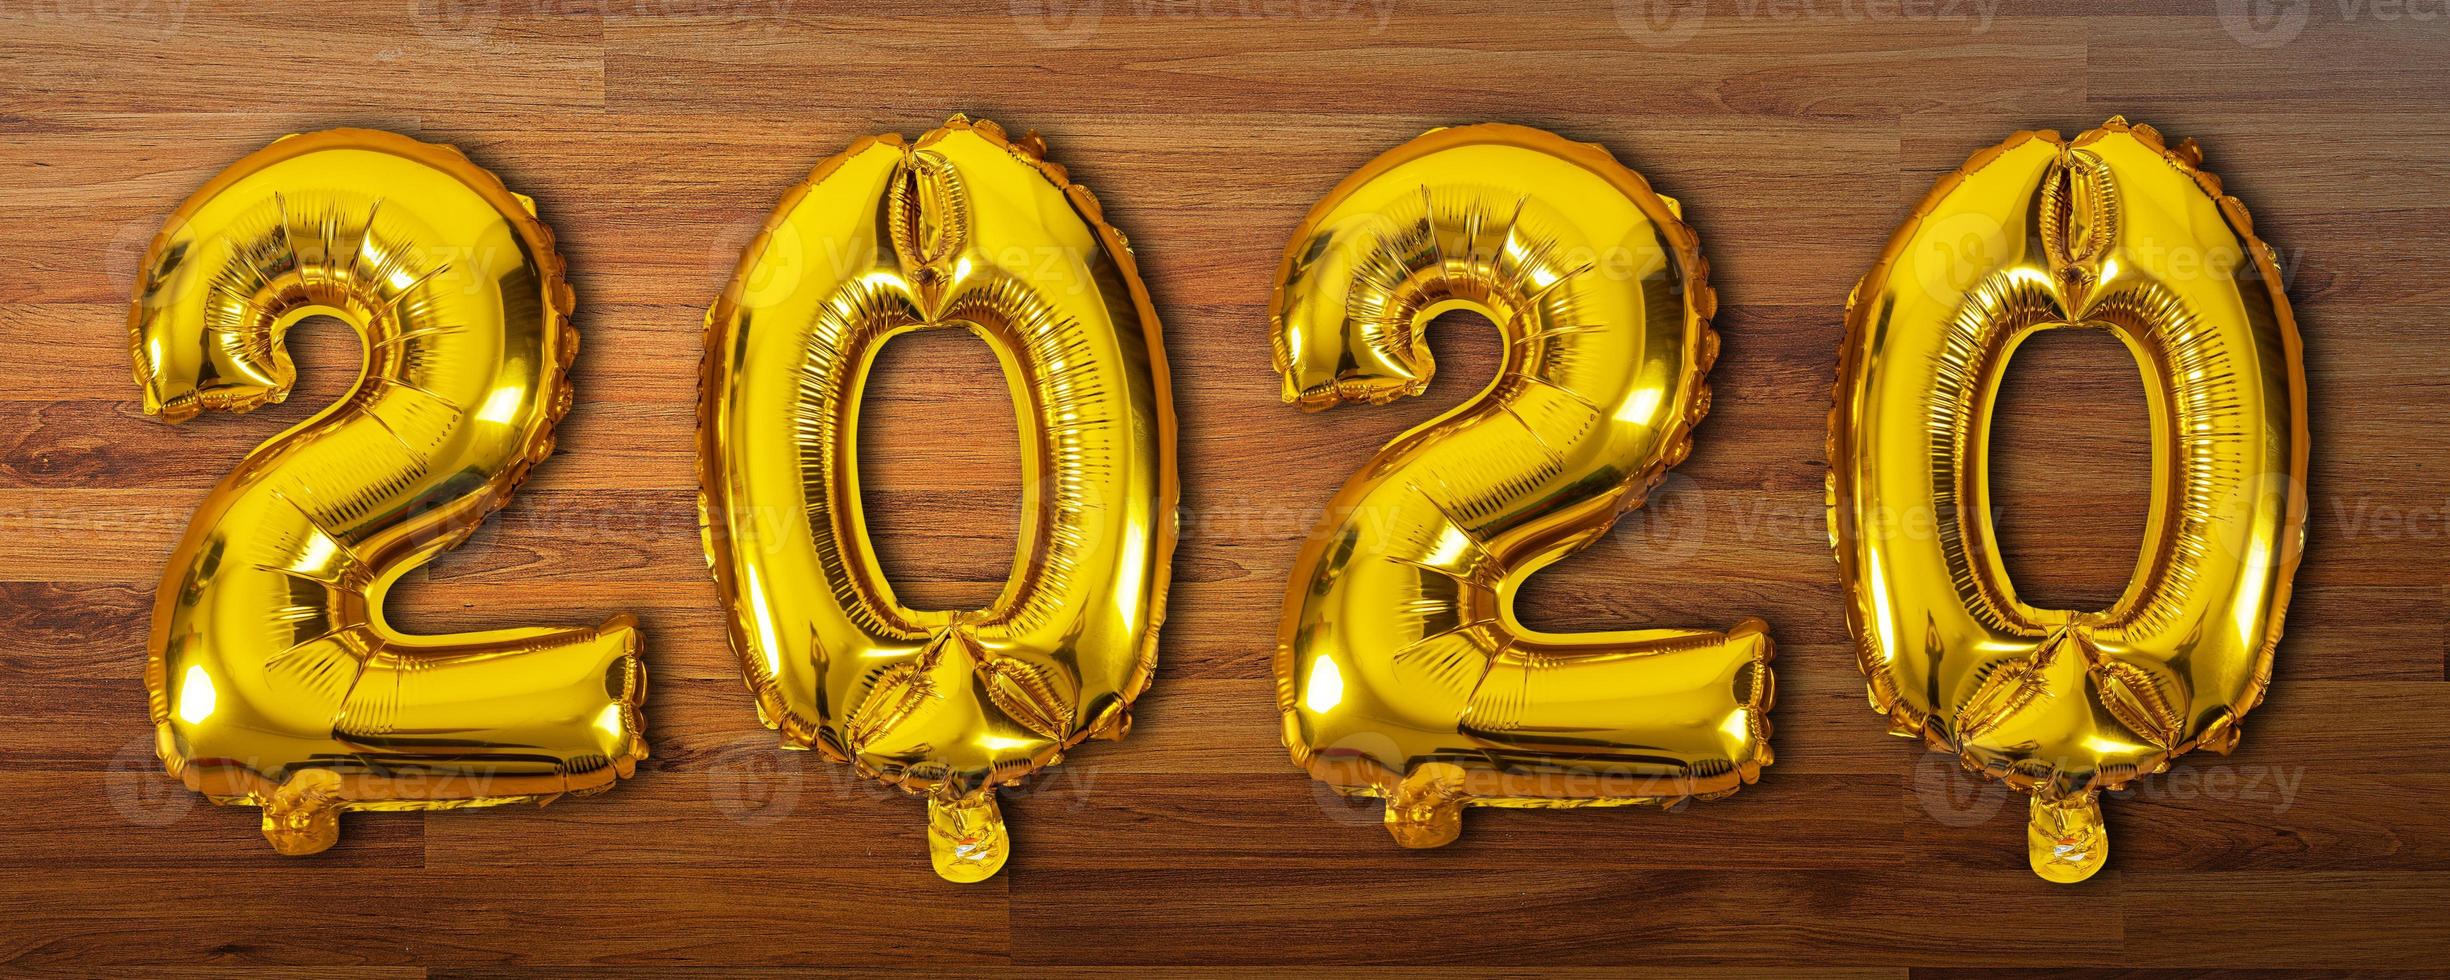 2020 number balloons on wooden background photo